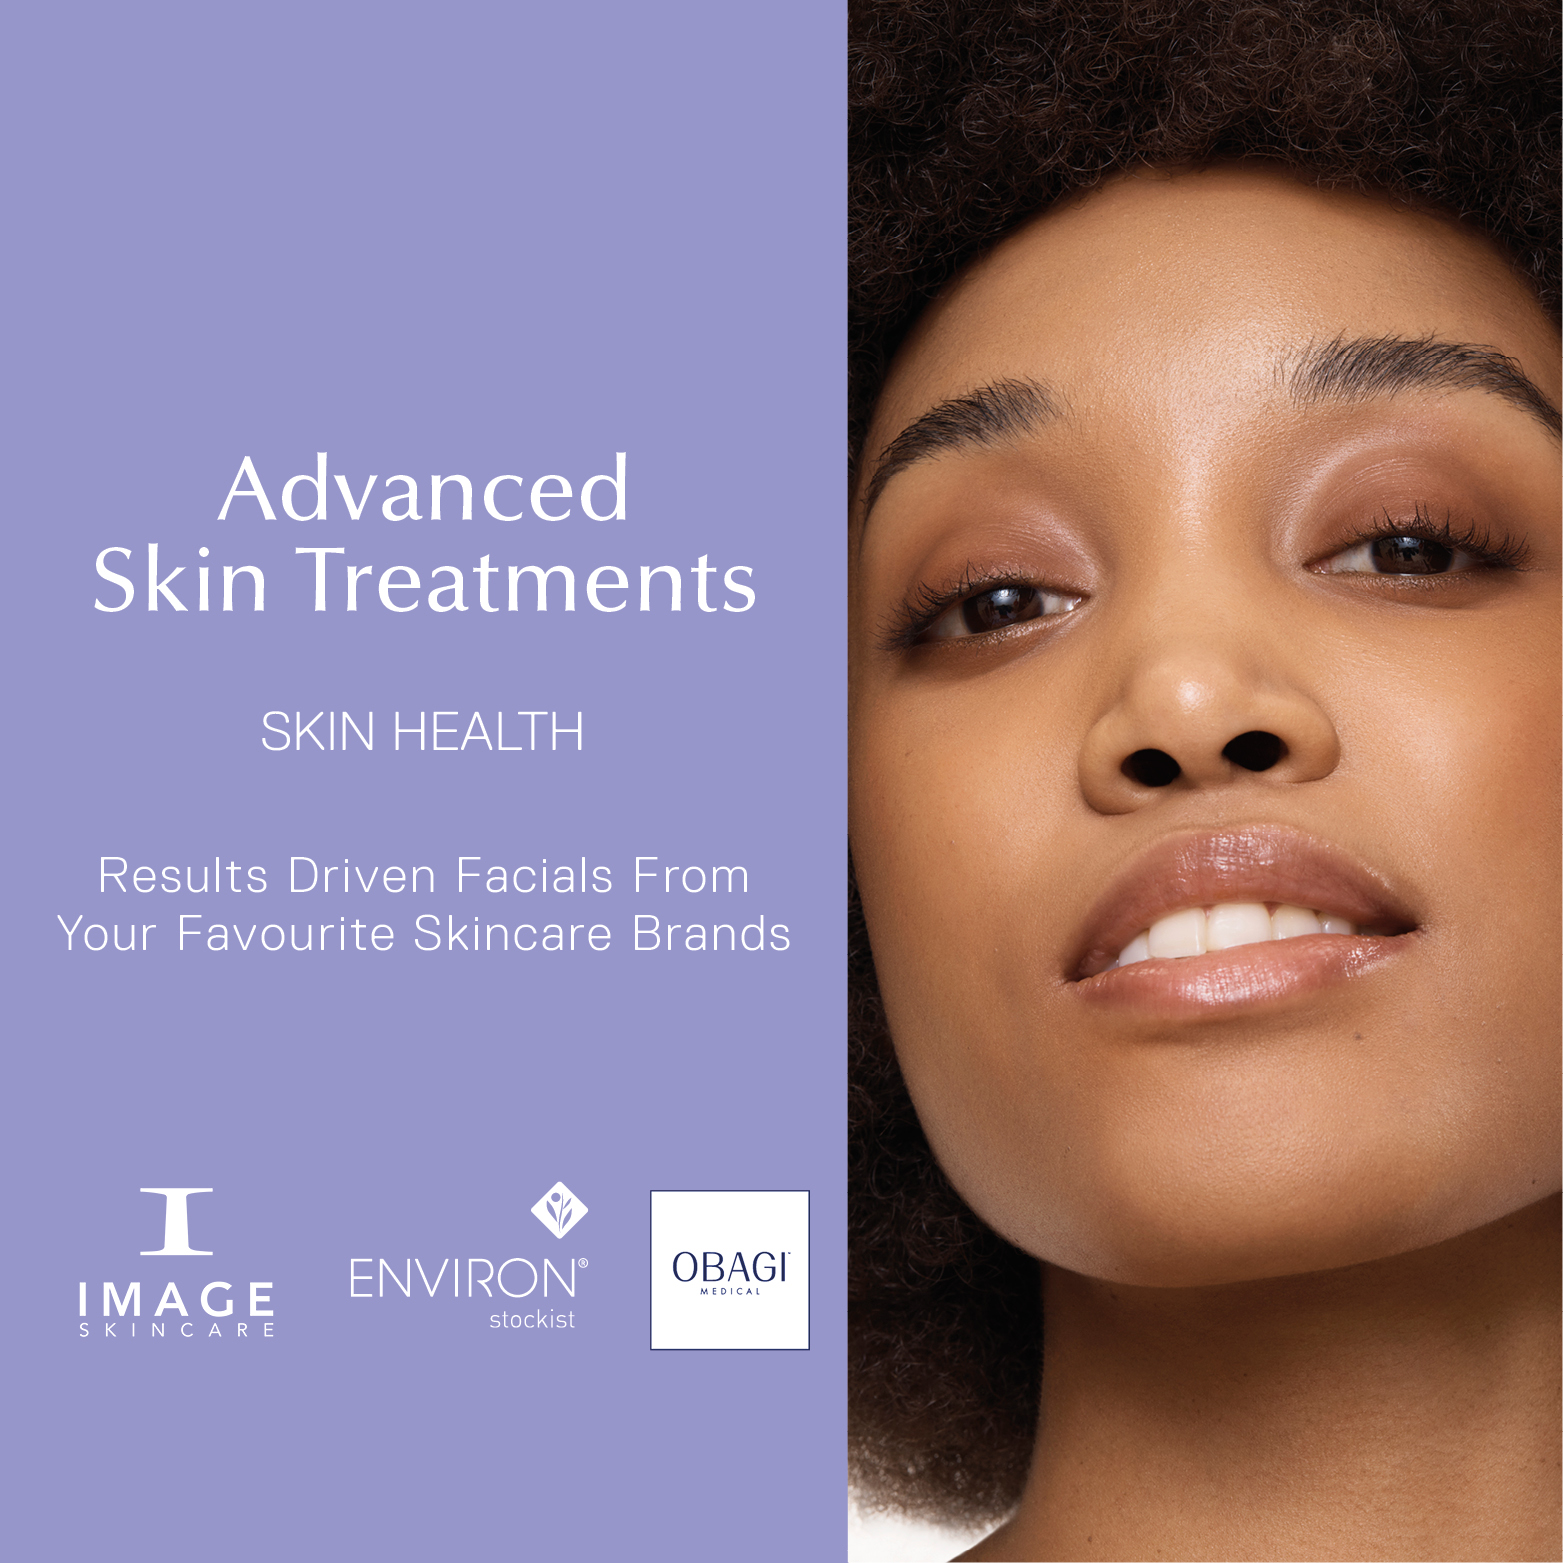 revolutionary skincare technology combined with powerful ingredients